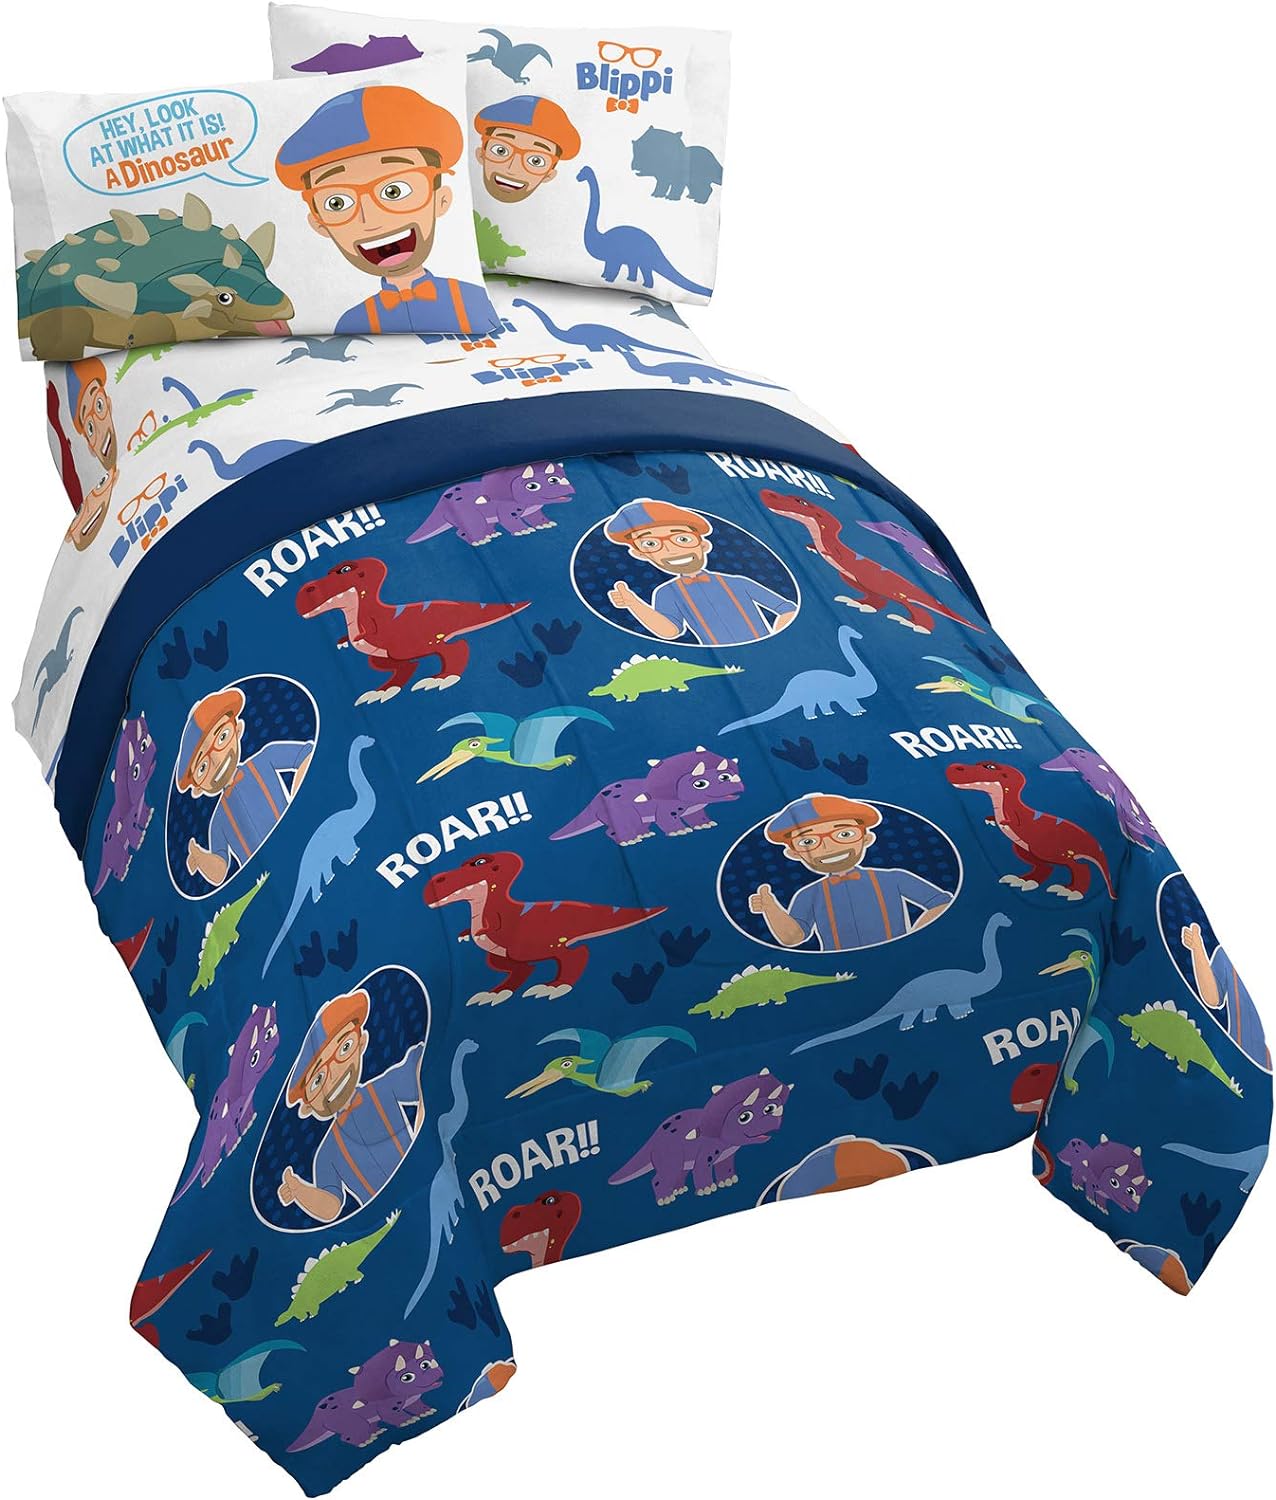 Blippi Bedding For Kids: The 10 Best Twin Blippi Sheets Your Child Will Love